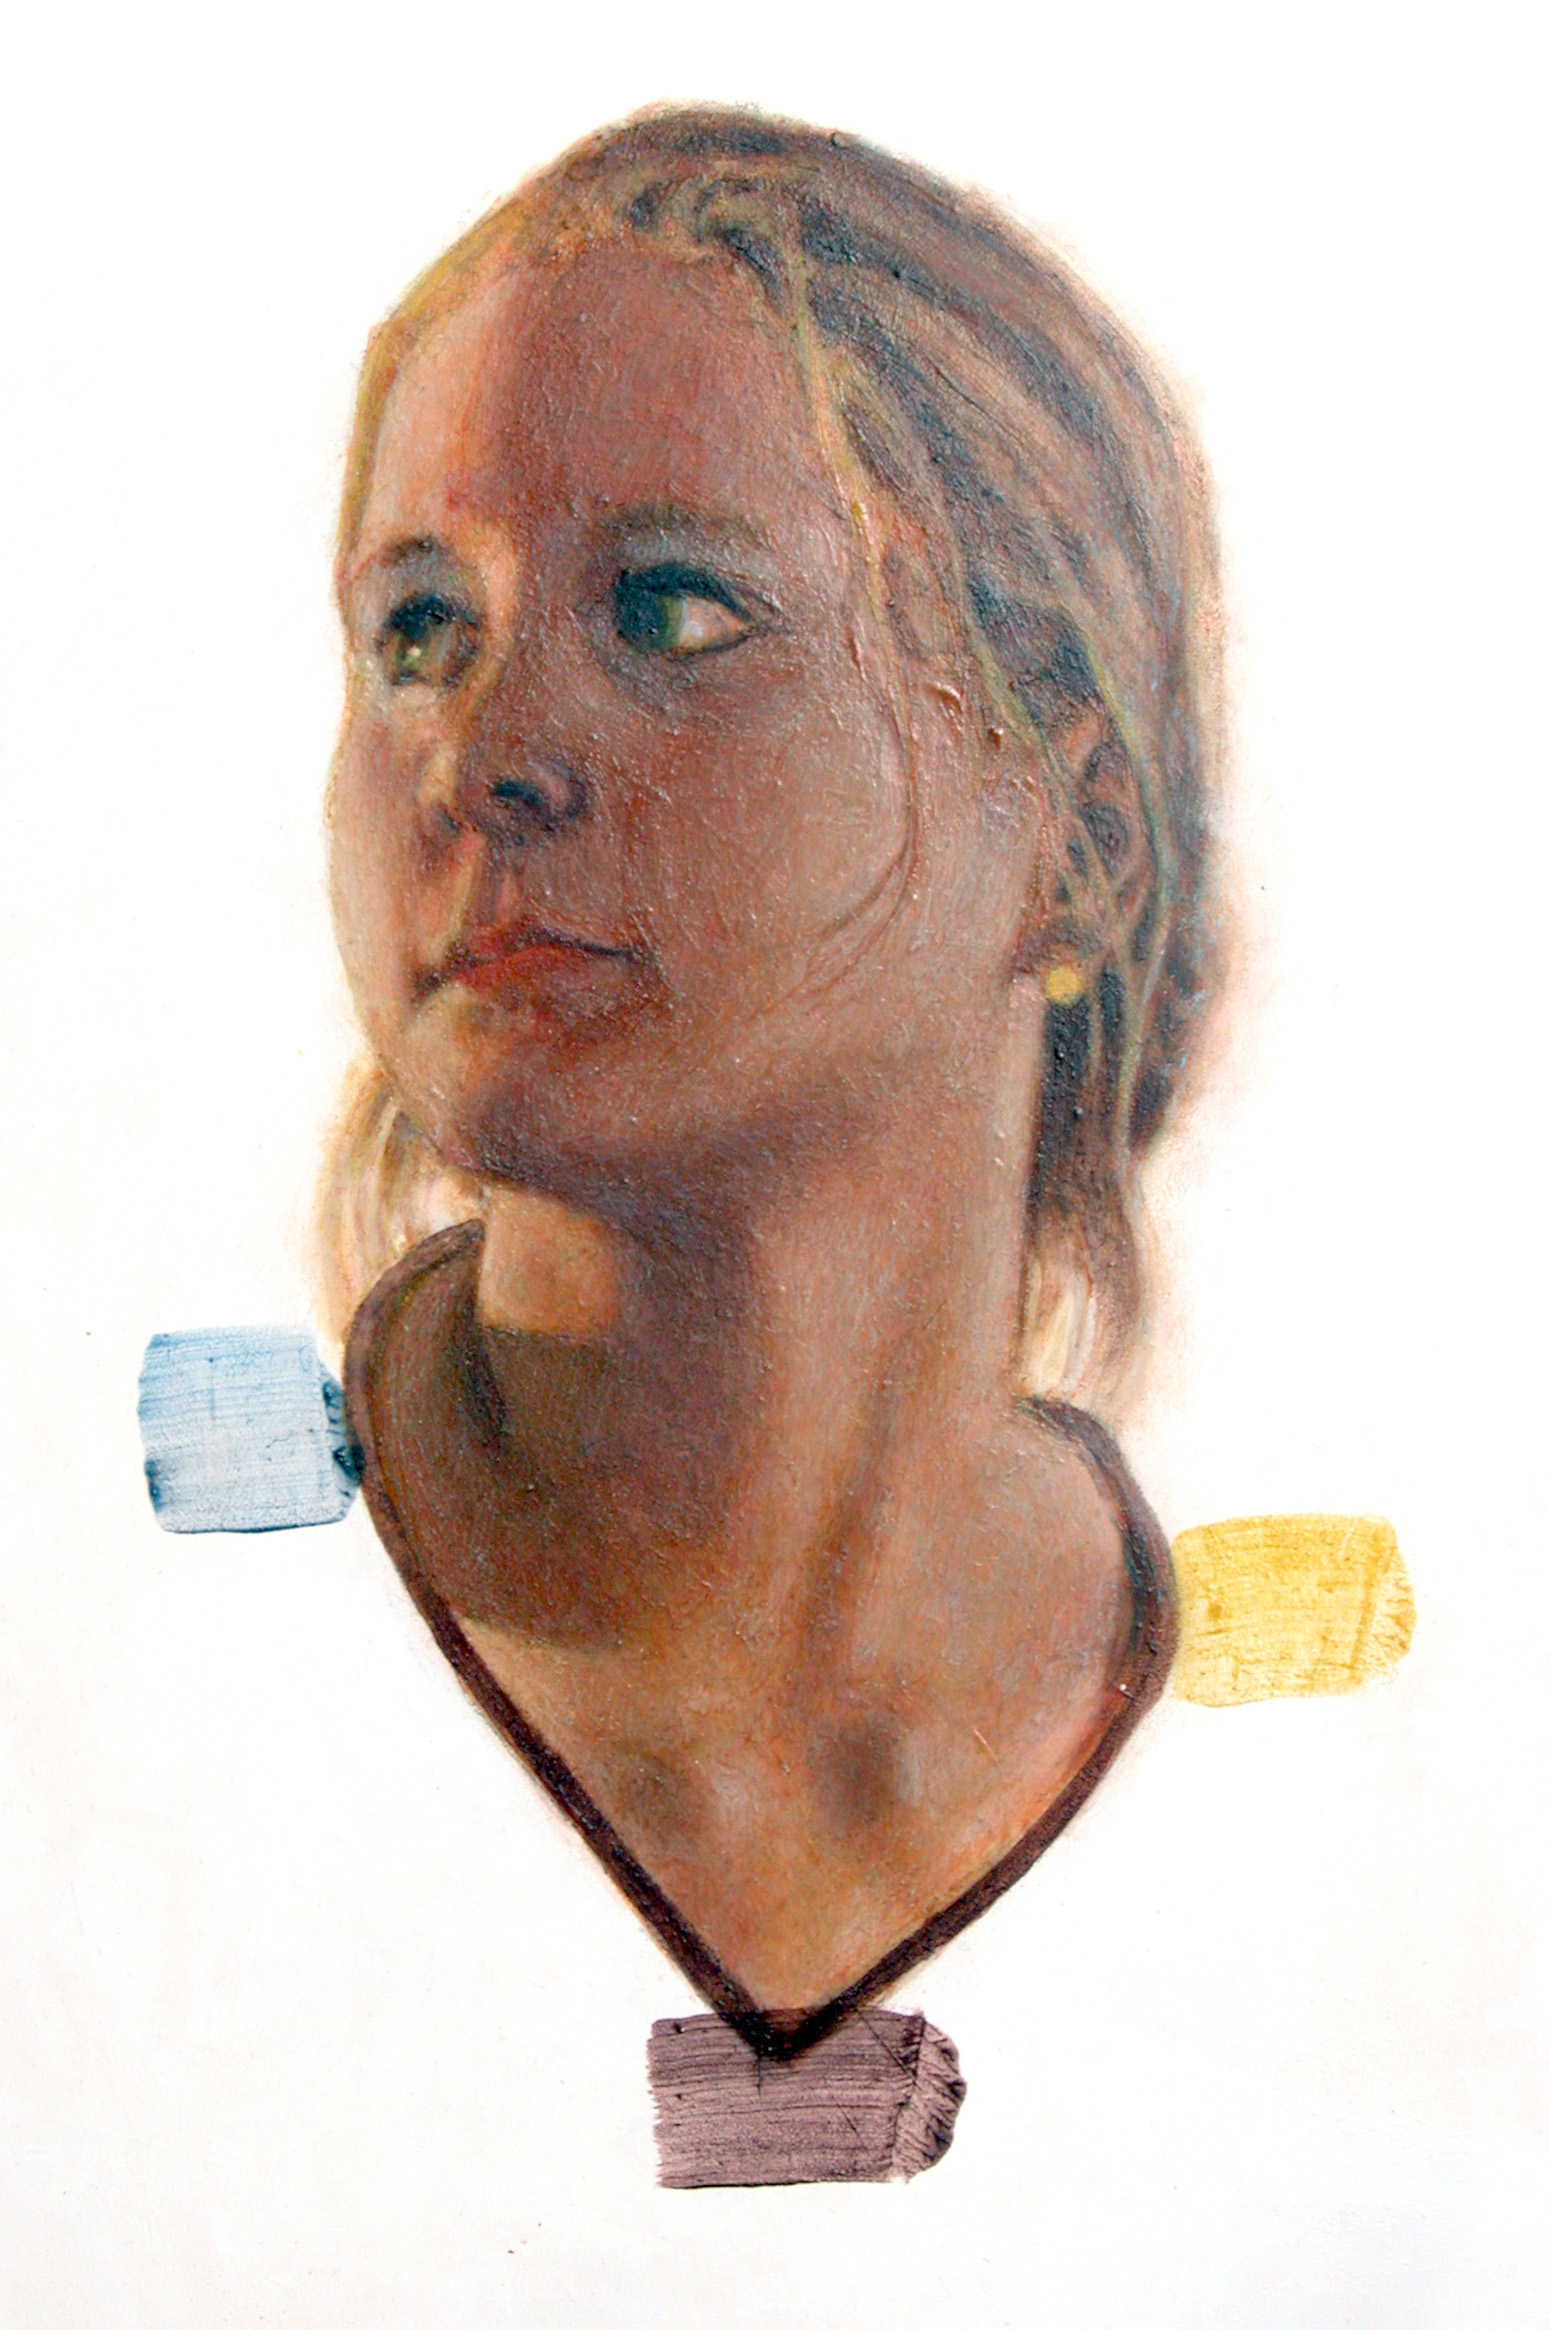 Sabrina by Butch Krieger, 2005, oil on chalk ground and high-density fiberboard (HDF) panel, 14 x 18 inches